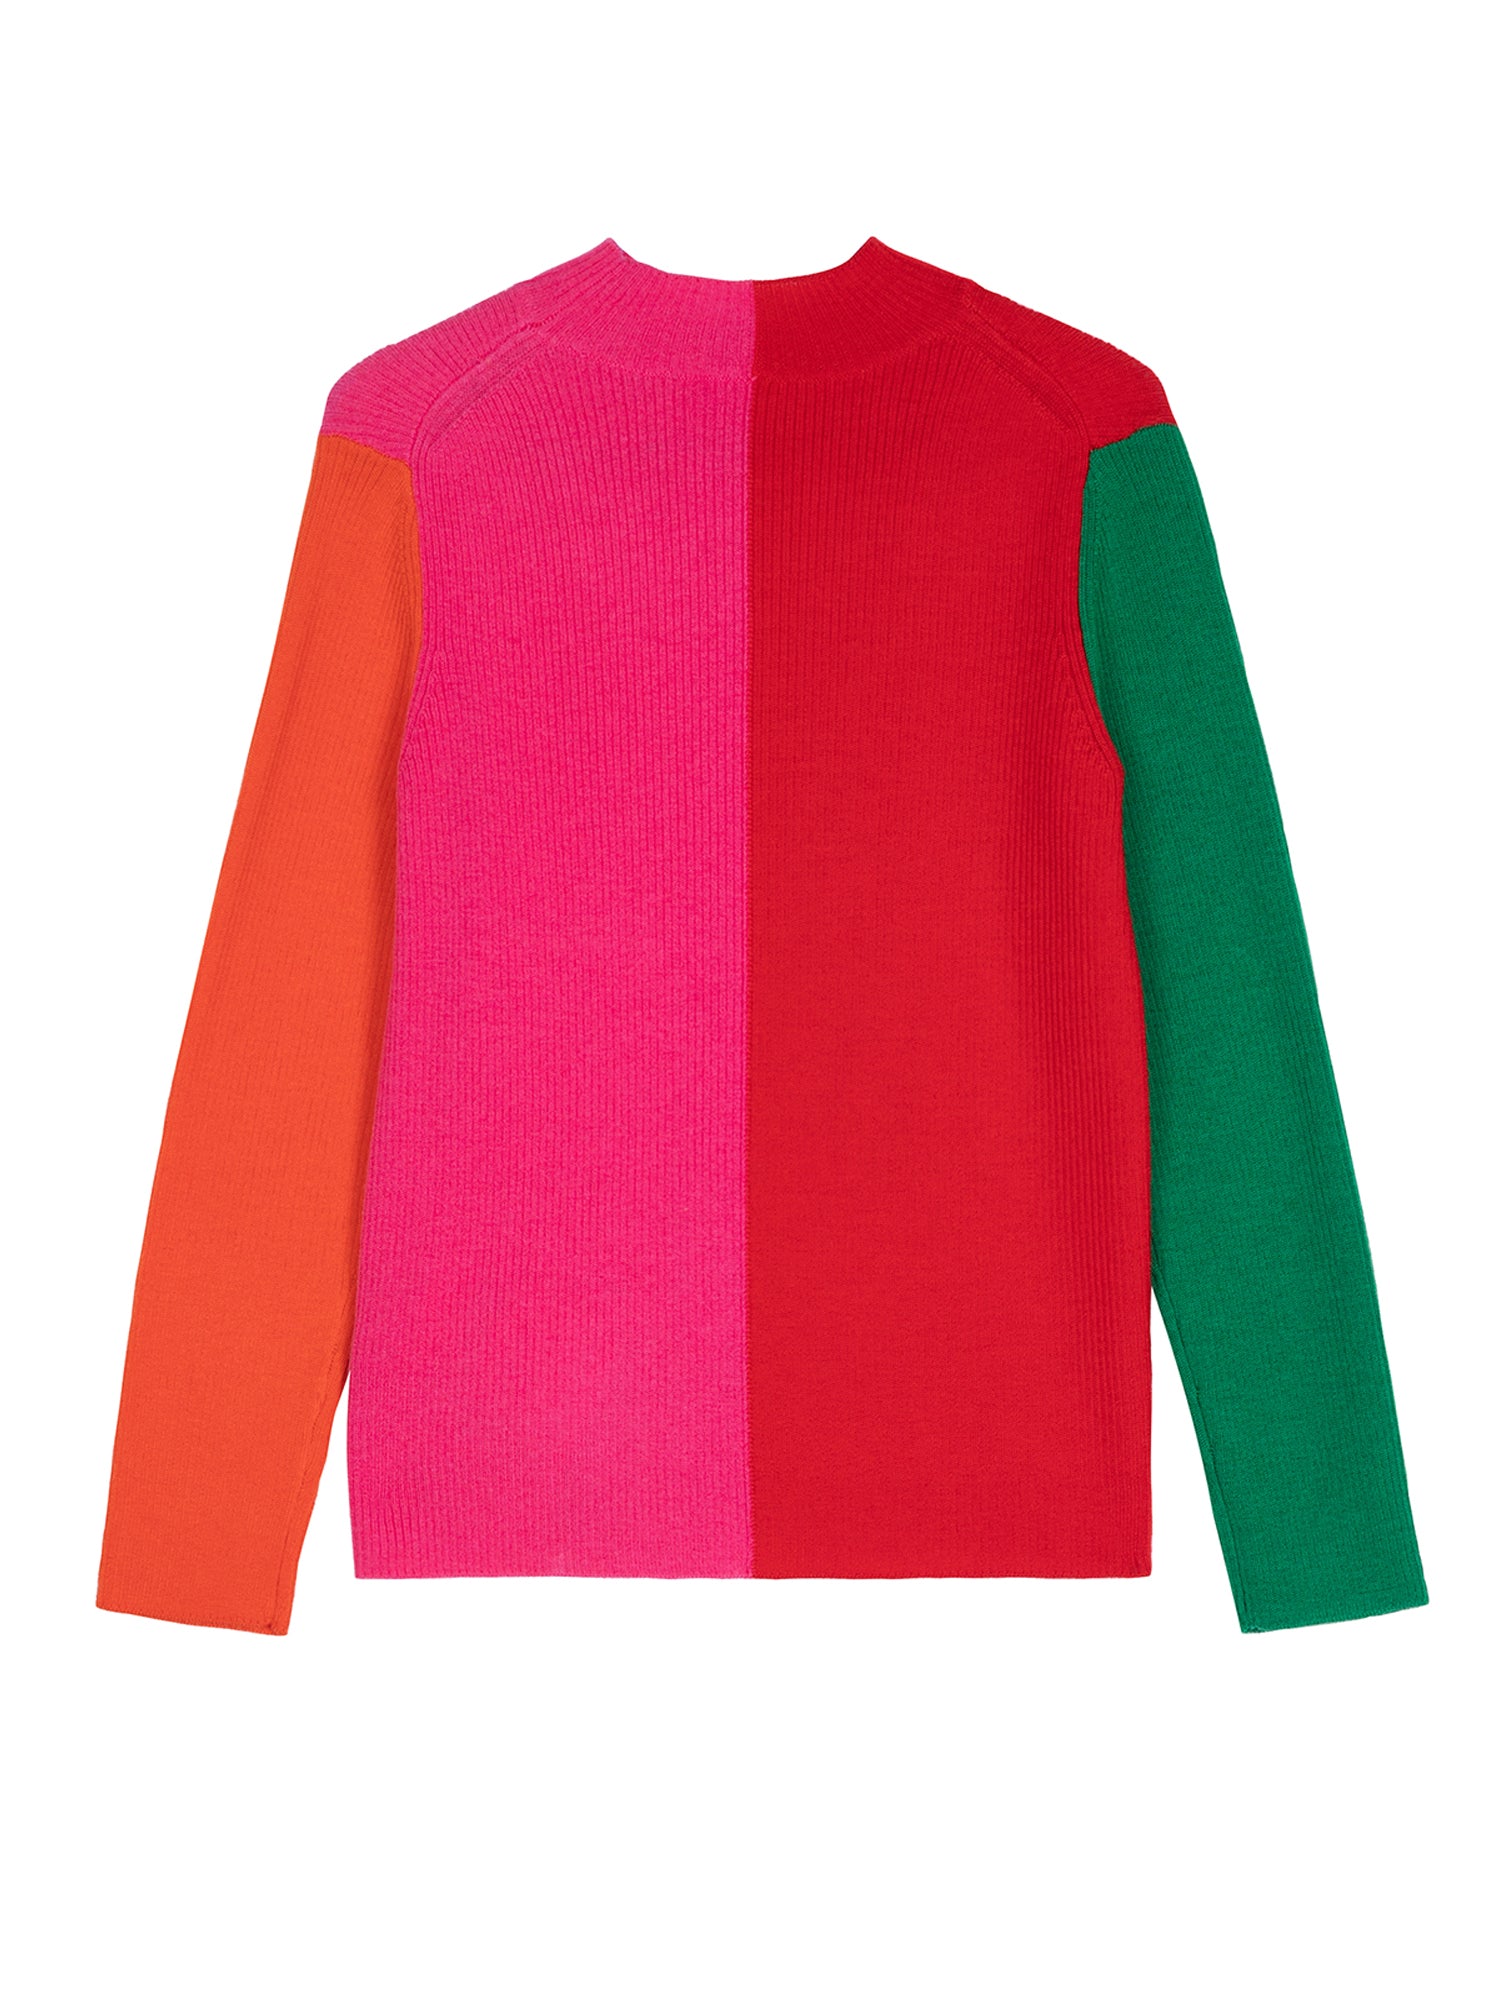 JNBY Candy Color-Block Sweater - Shirts & Tops